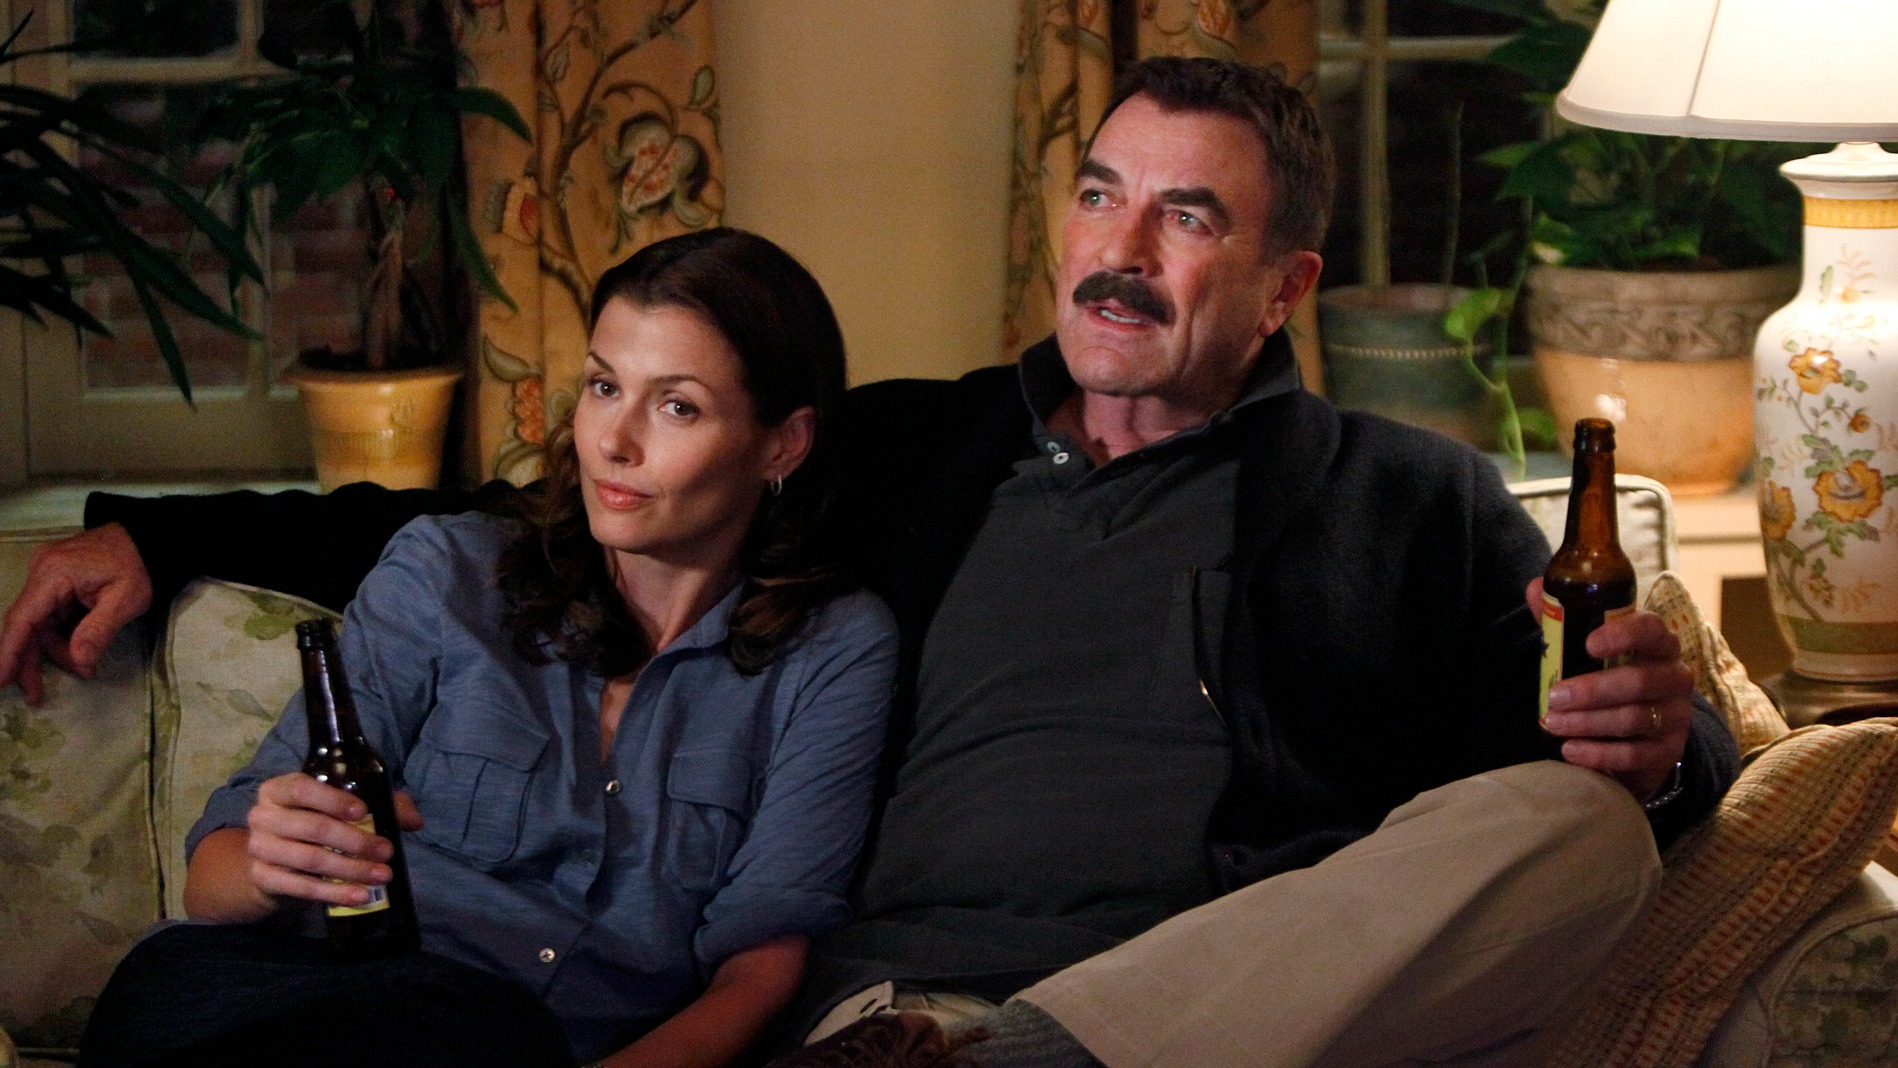 10 Amazing Pieces Of Parenting Advice We've Learned From Blue Bloods.